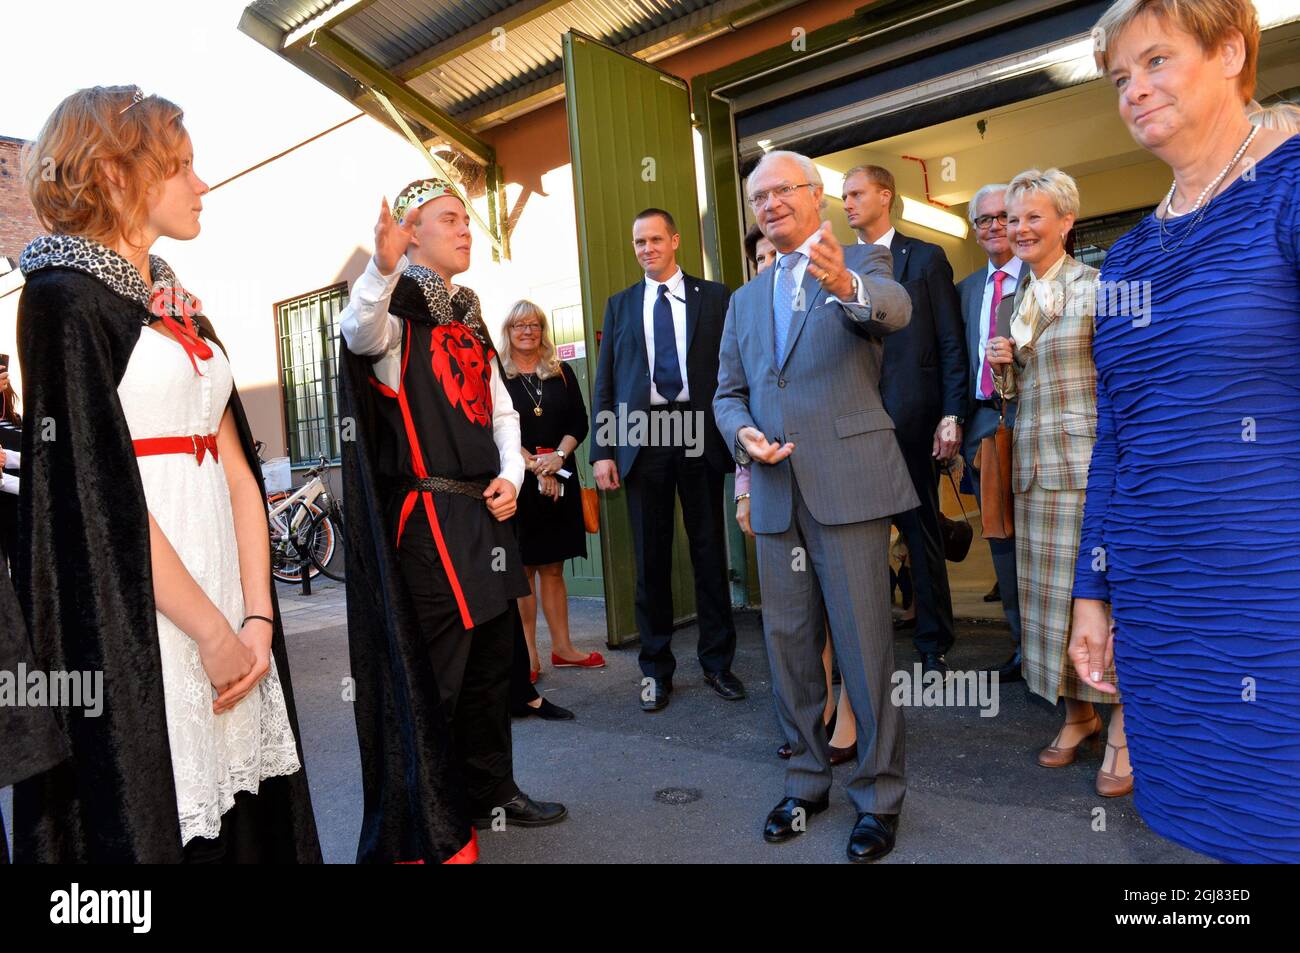 NORRKOPING 20130903 King Carl Gustaf and Queen Silvia are seen welcomed to the Campus Norrkping/Printed Electronics Arena in the city of Norrkoping, Sweden, September 3, 2013. The visit is a part of the Kings ongoing 40 year anniversary on the throne. Foto:Jonas Ekstromer / SCANPIX / Kod 10030  Stock Photo